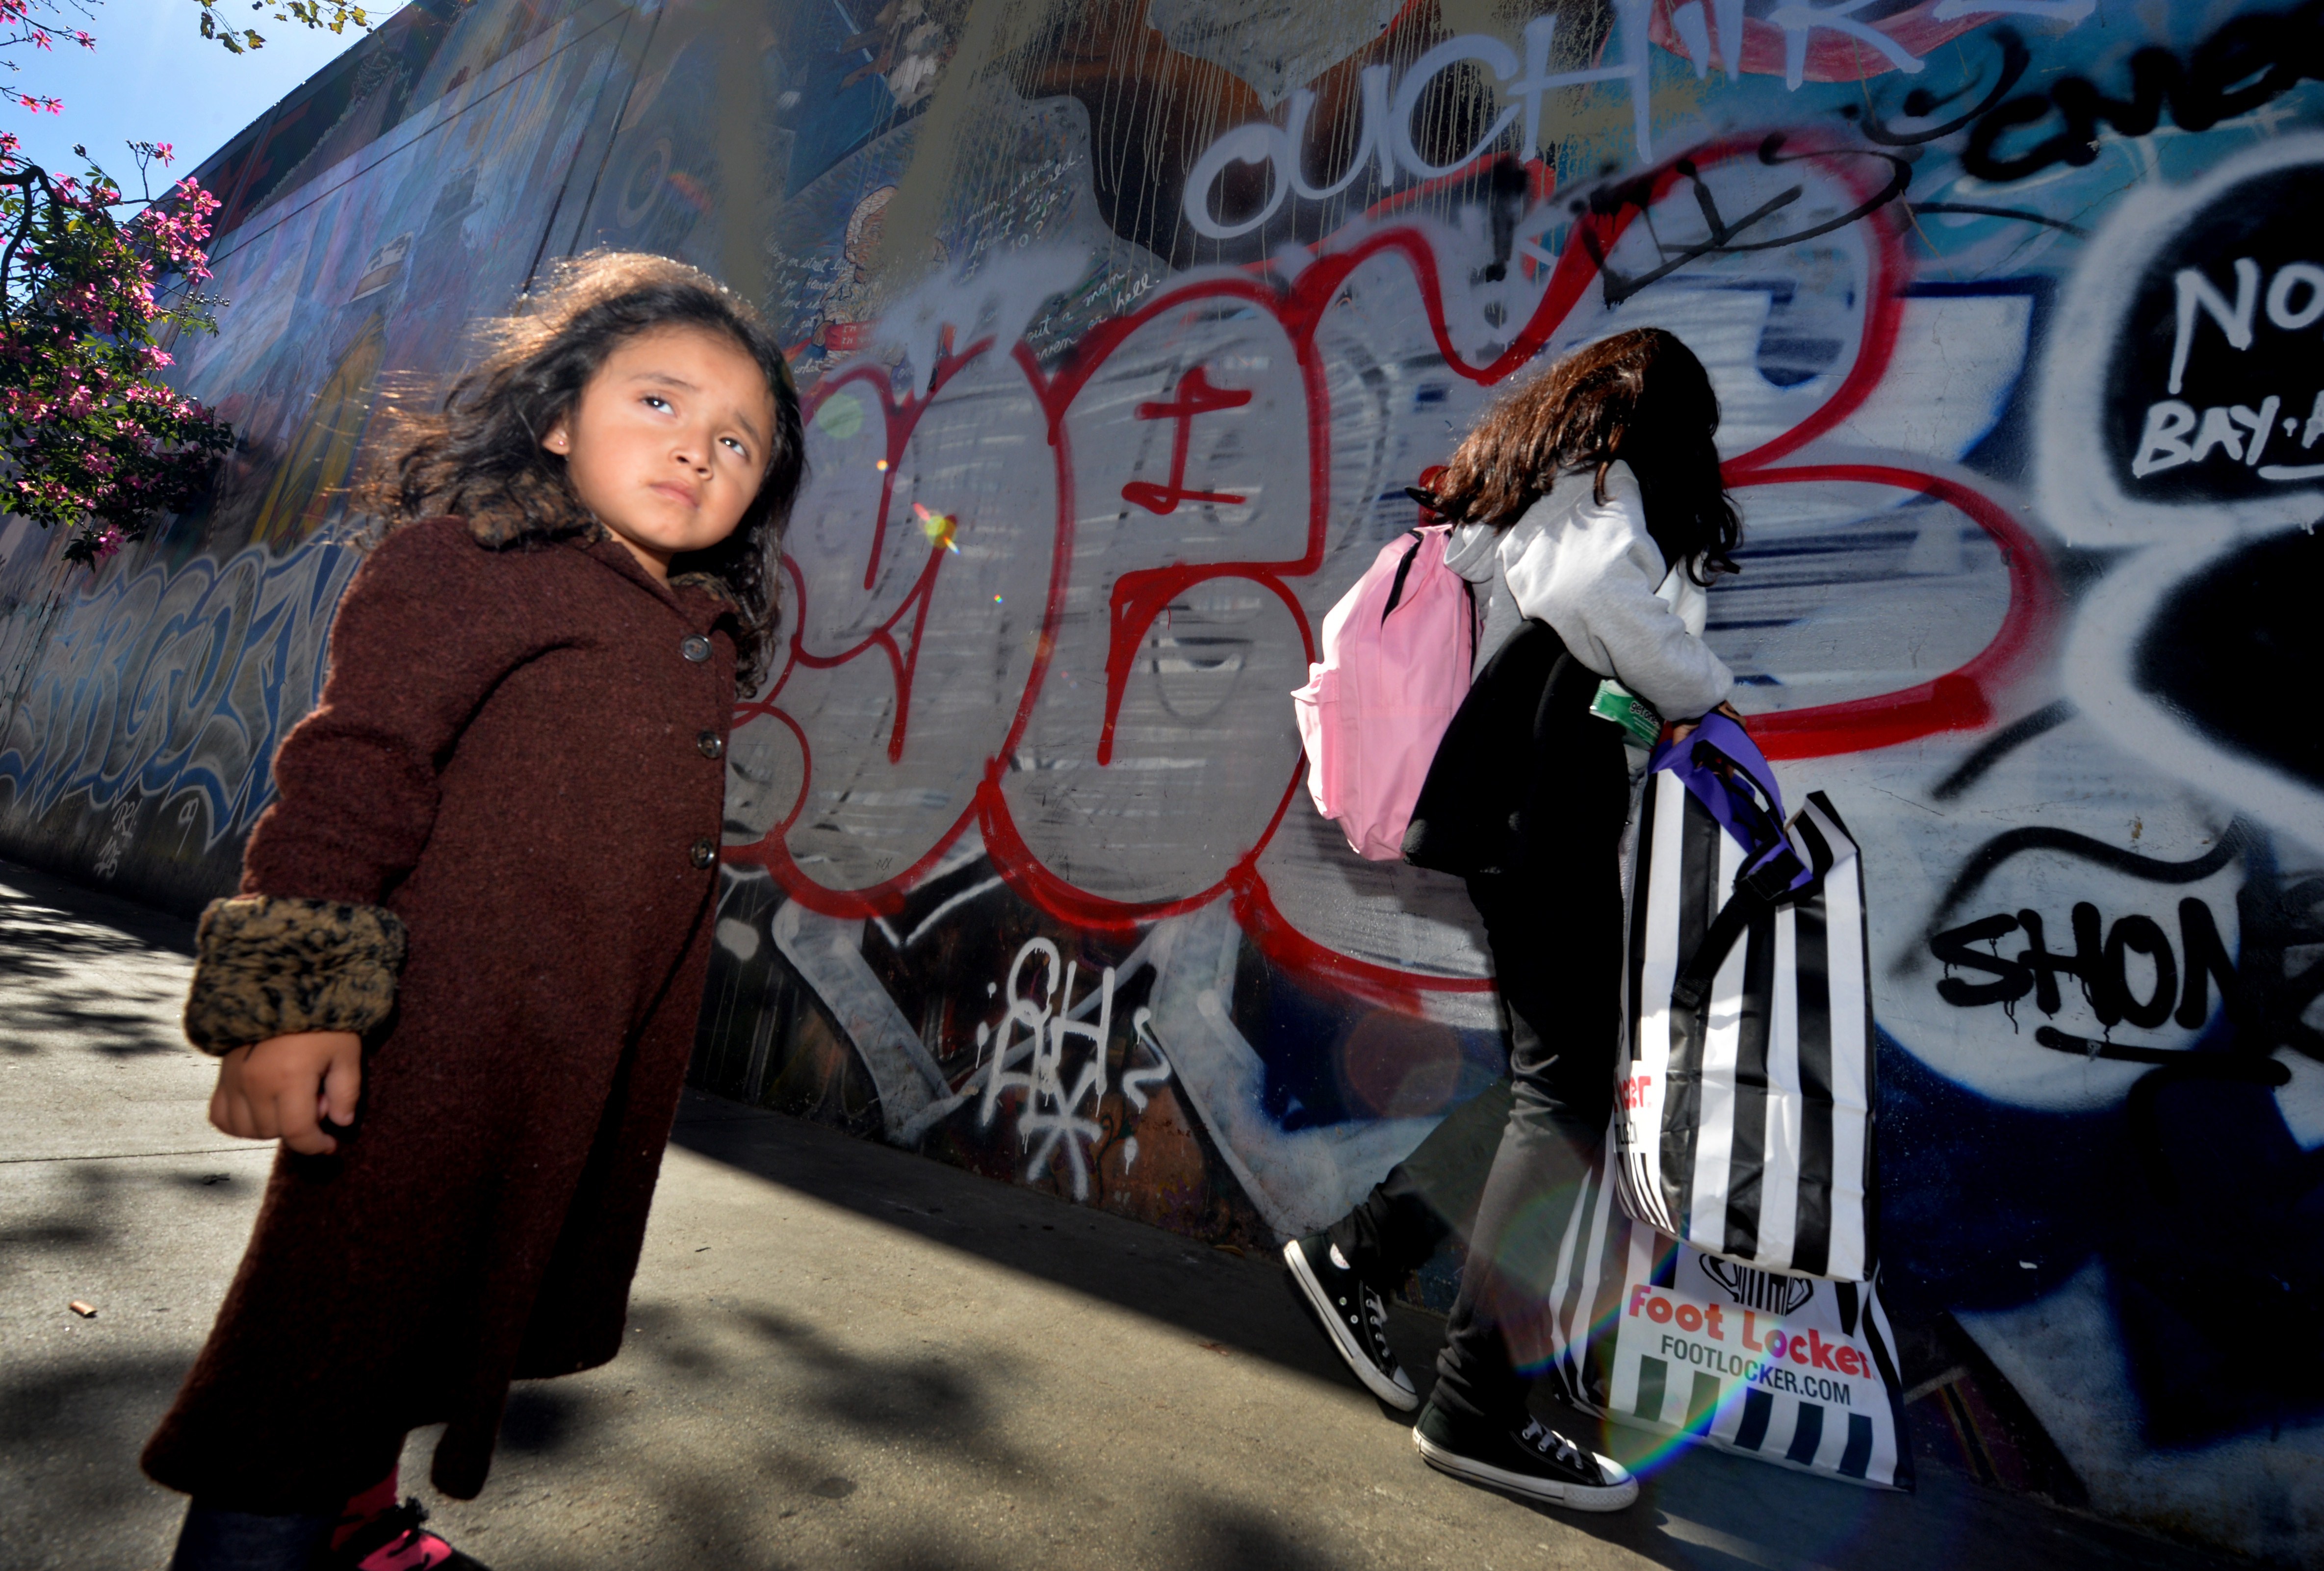 Three year old Saria Amaya (L) waits with her mother after receiving shoes and school supplies during a charity event to help more than 4,000 underprivileged children at the Fred Jordan Mission in the Skid Row area of Los Angeles on October 2, 2014. (MARK RALSTON--AFP/Getty Images)